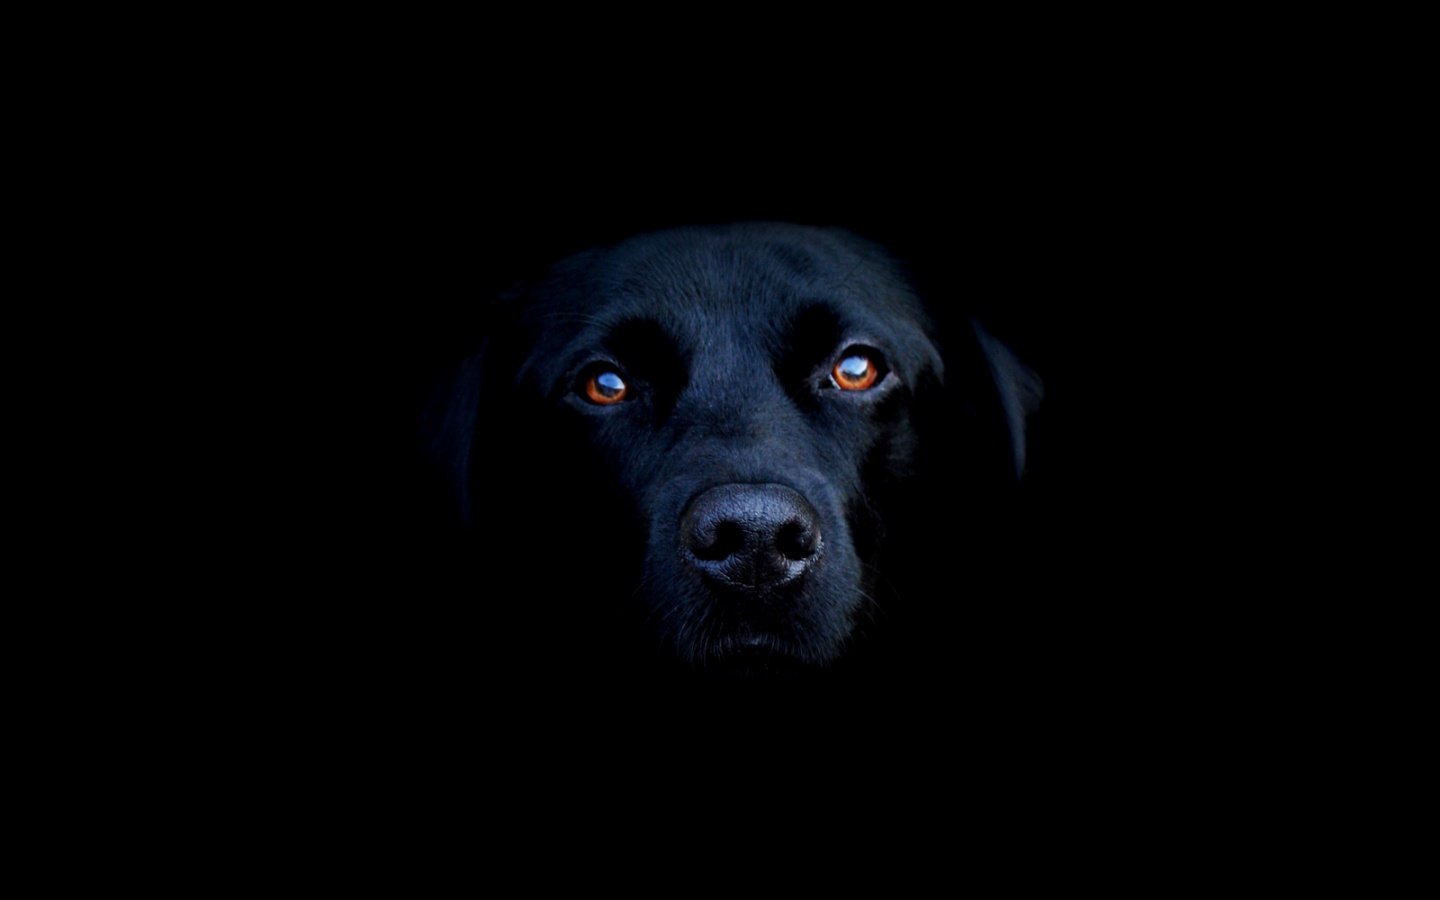 The eyes of dogs contain a special membrane, called the tapetum lucidum, which permits them to see in the dark.